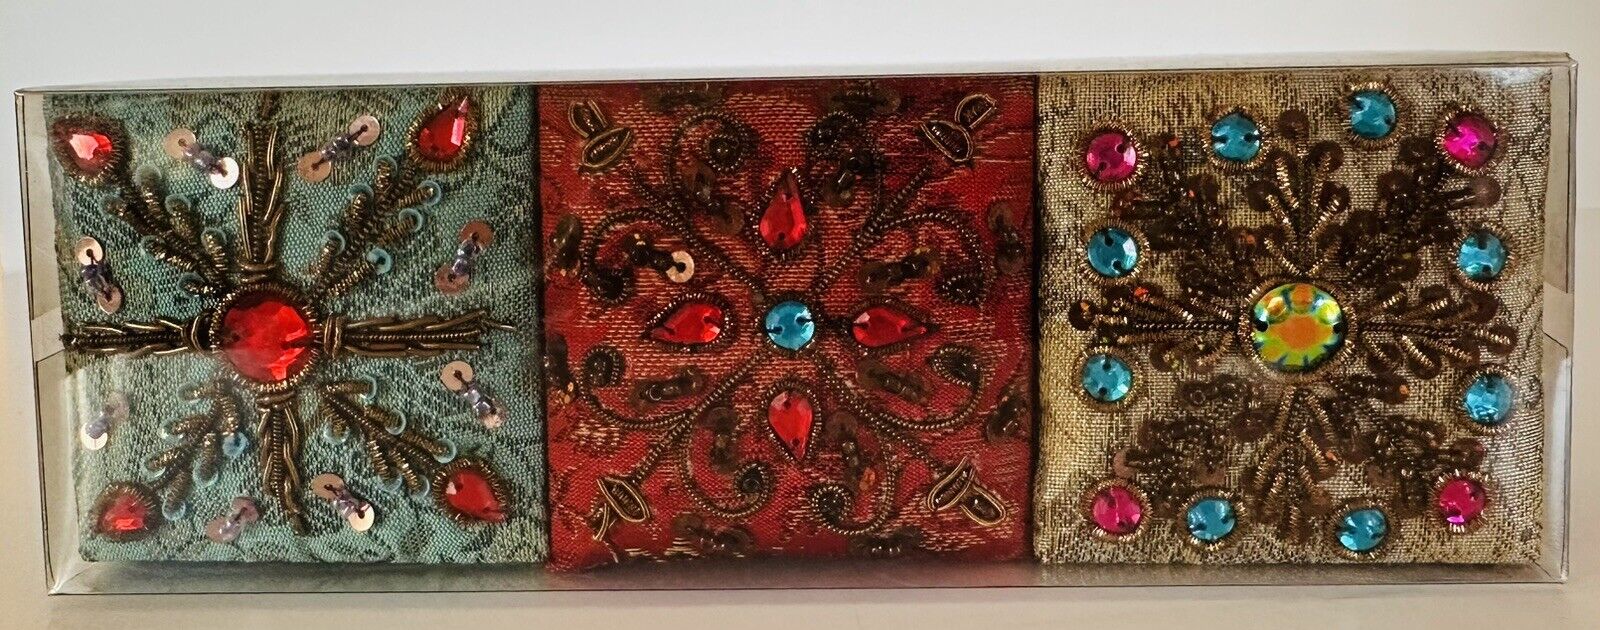 New PIER 1 IMPORTS Set 3 Mini Sparkling Sequin Beaded Design Boxes Gift Mother’s